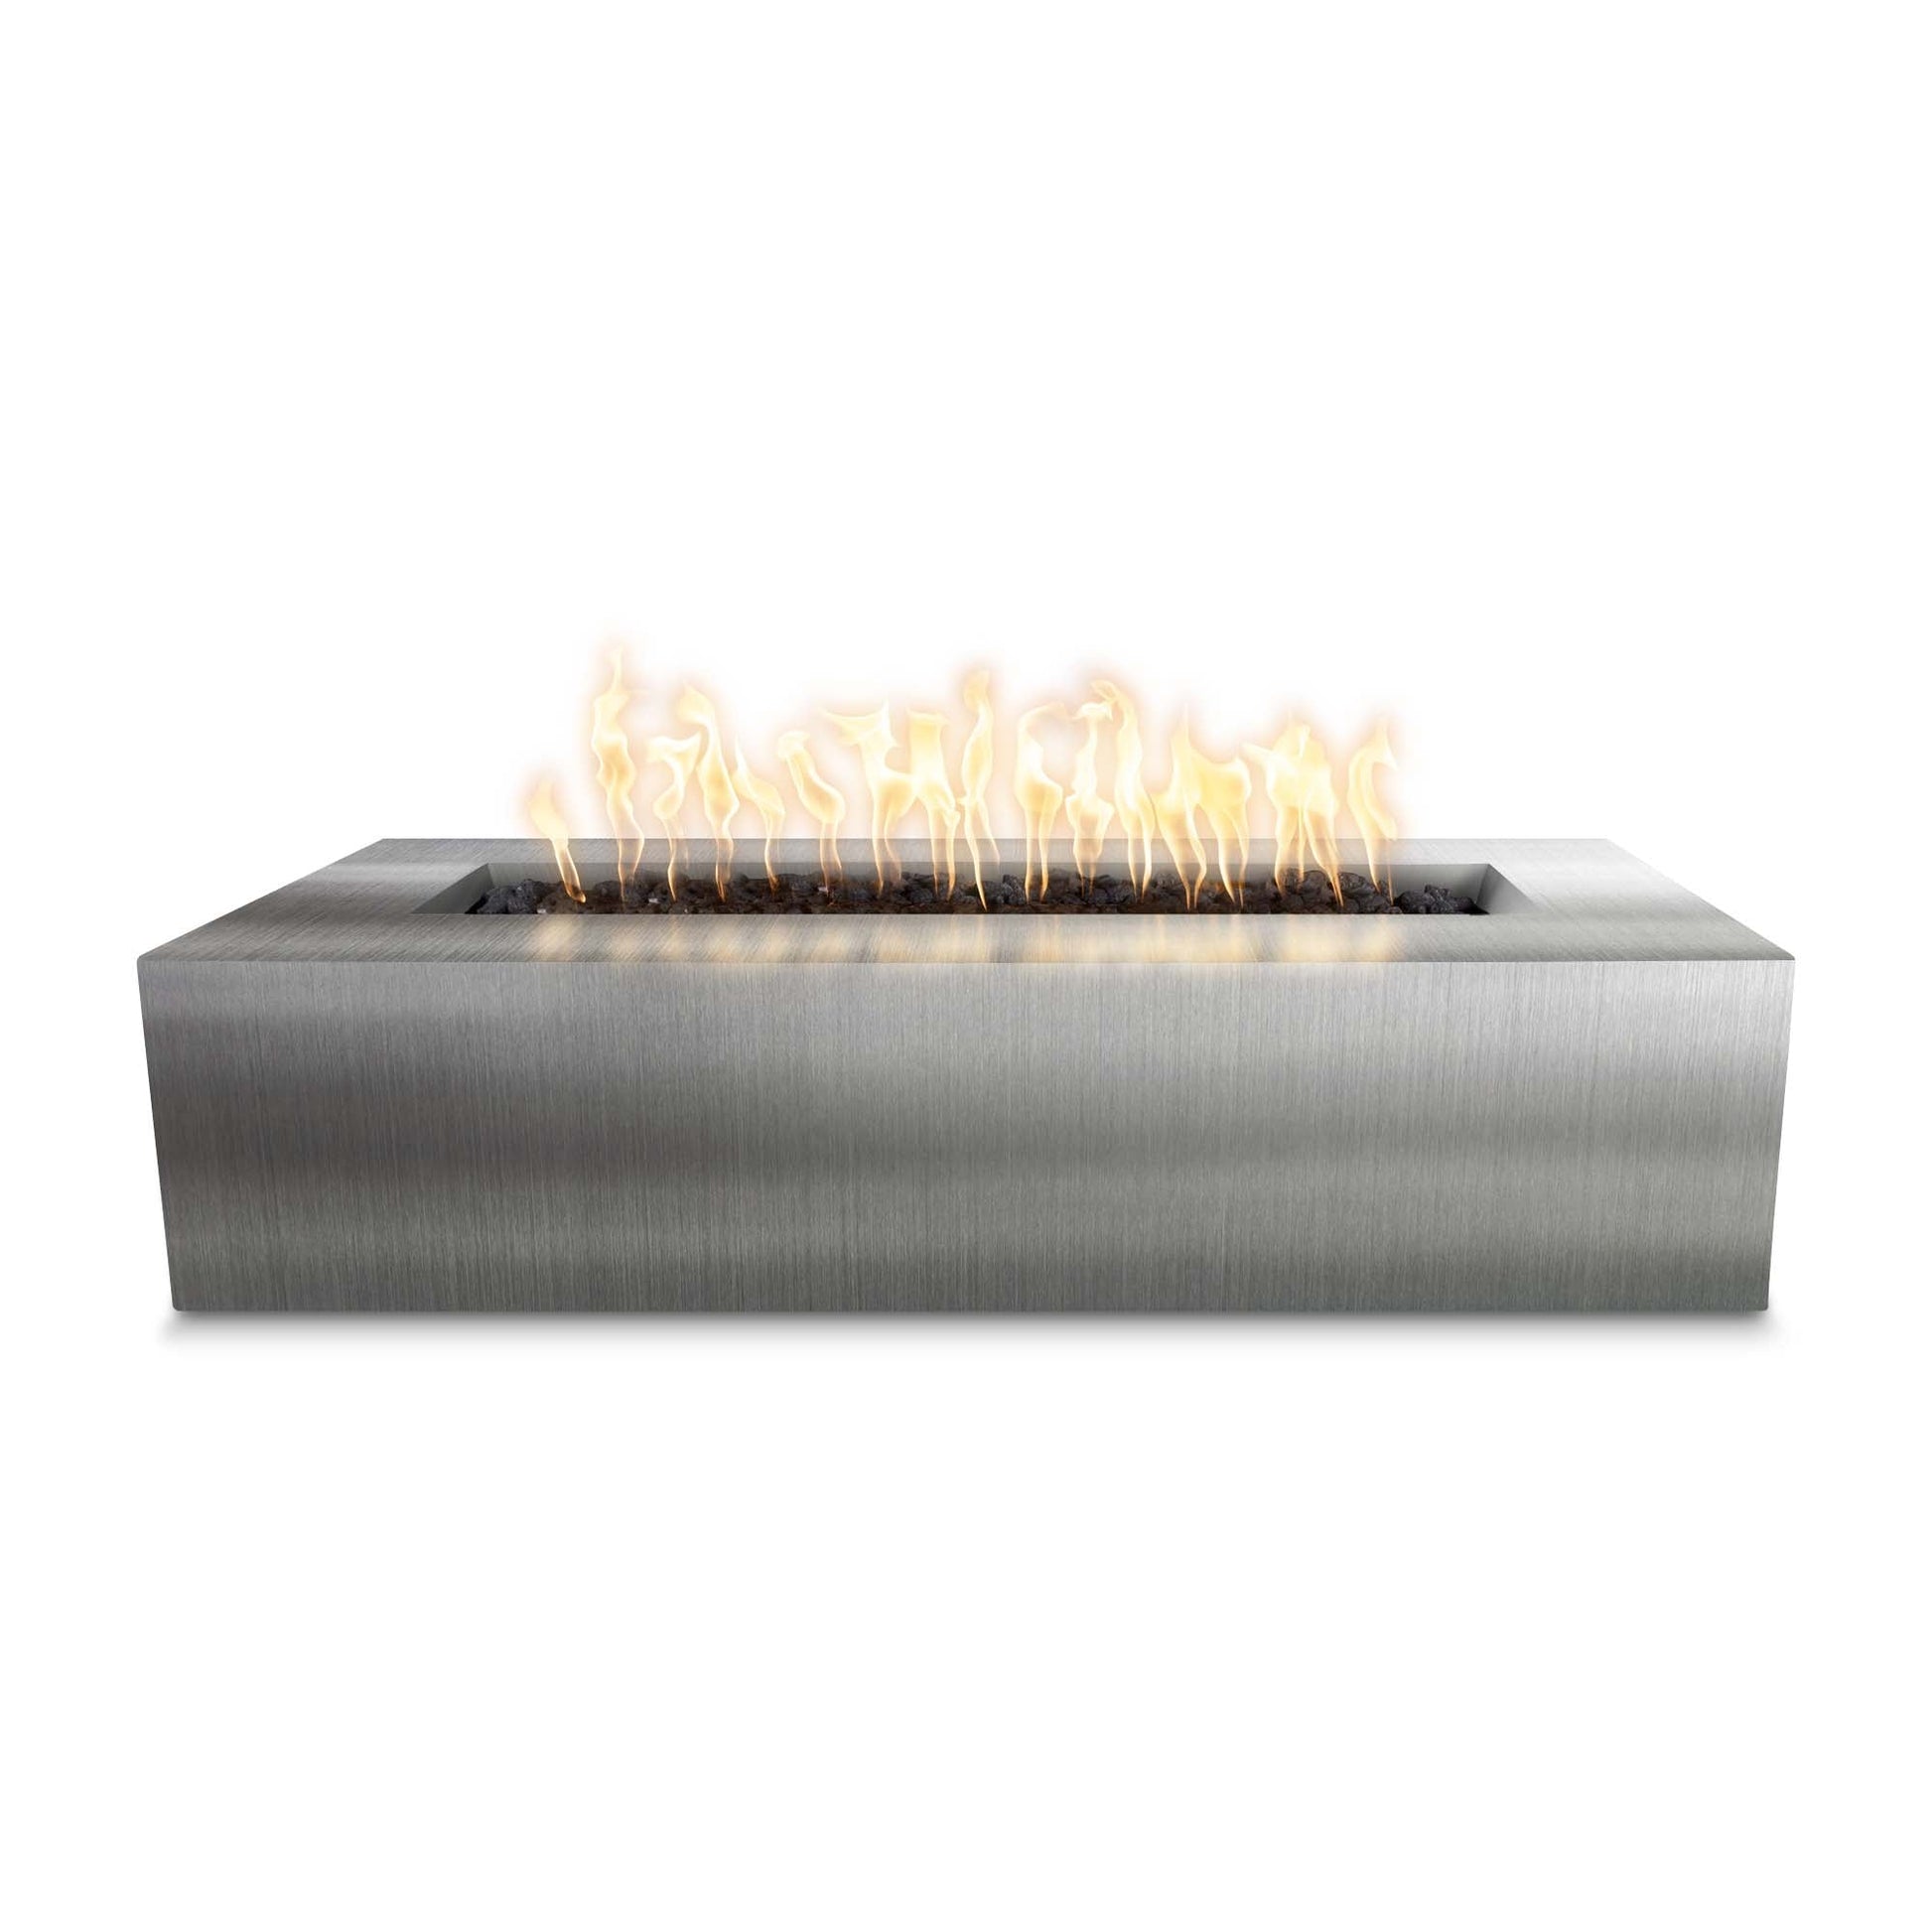 The Outdoor Plus Rectangular Regal 54" Stainless Steel Liquid Propane Fire Pit with Match Lit Ignition